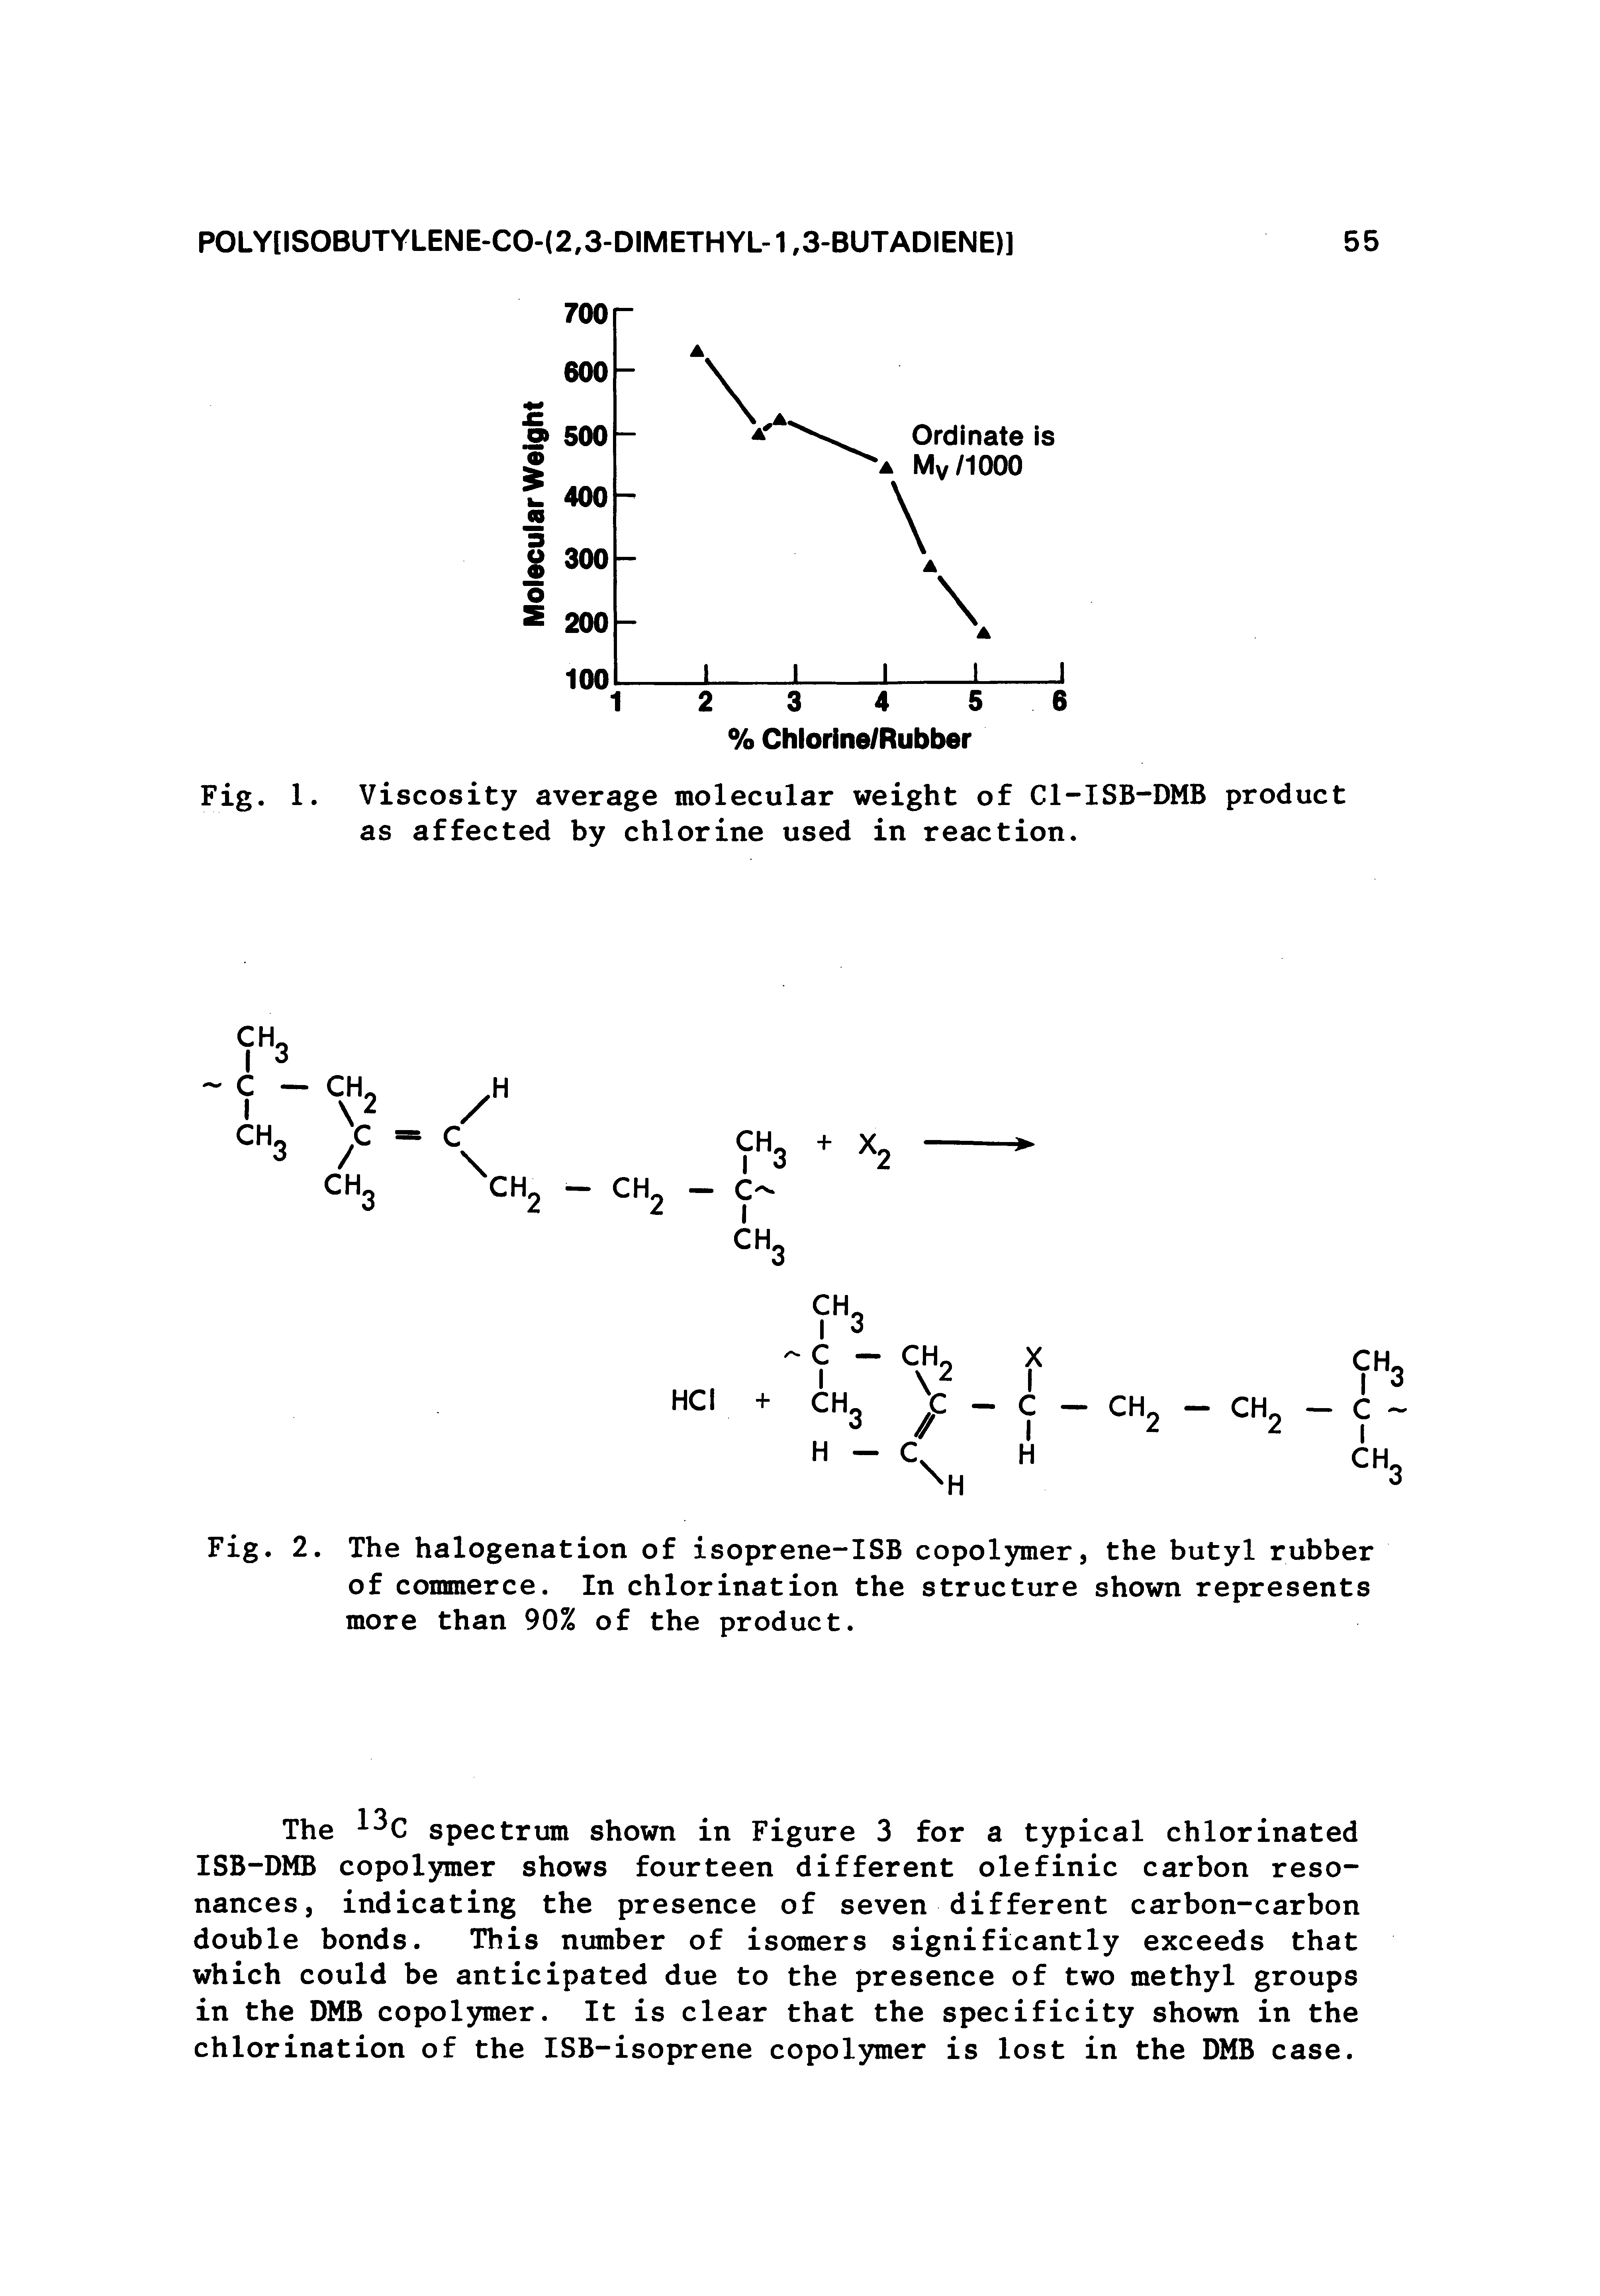 Fig. 1. Viscosity average molecular weight of Cl-ISB-DMB product as affected by chlorine used in reaction.